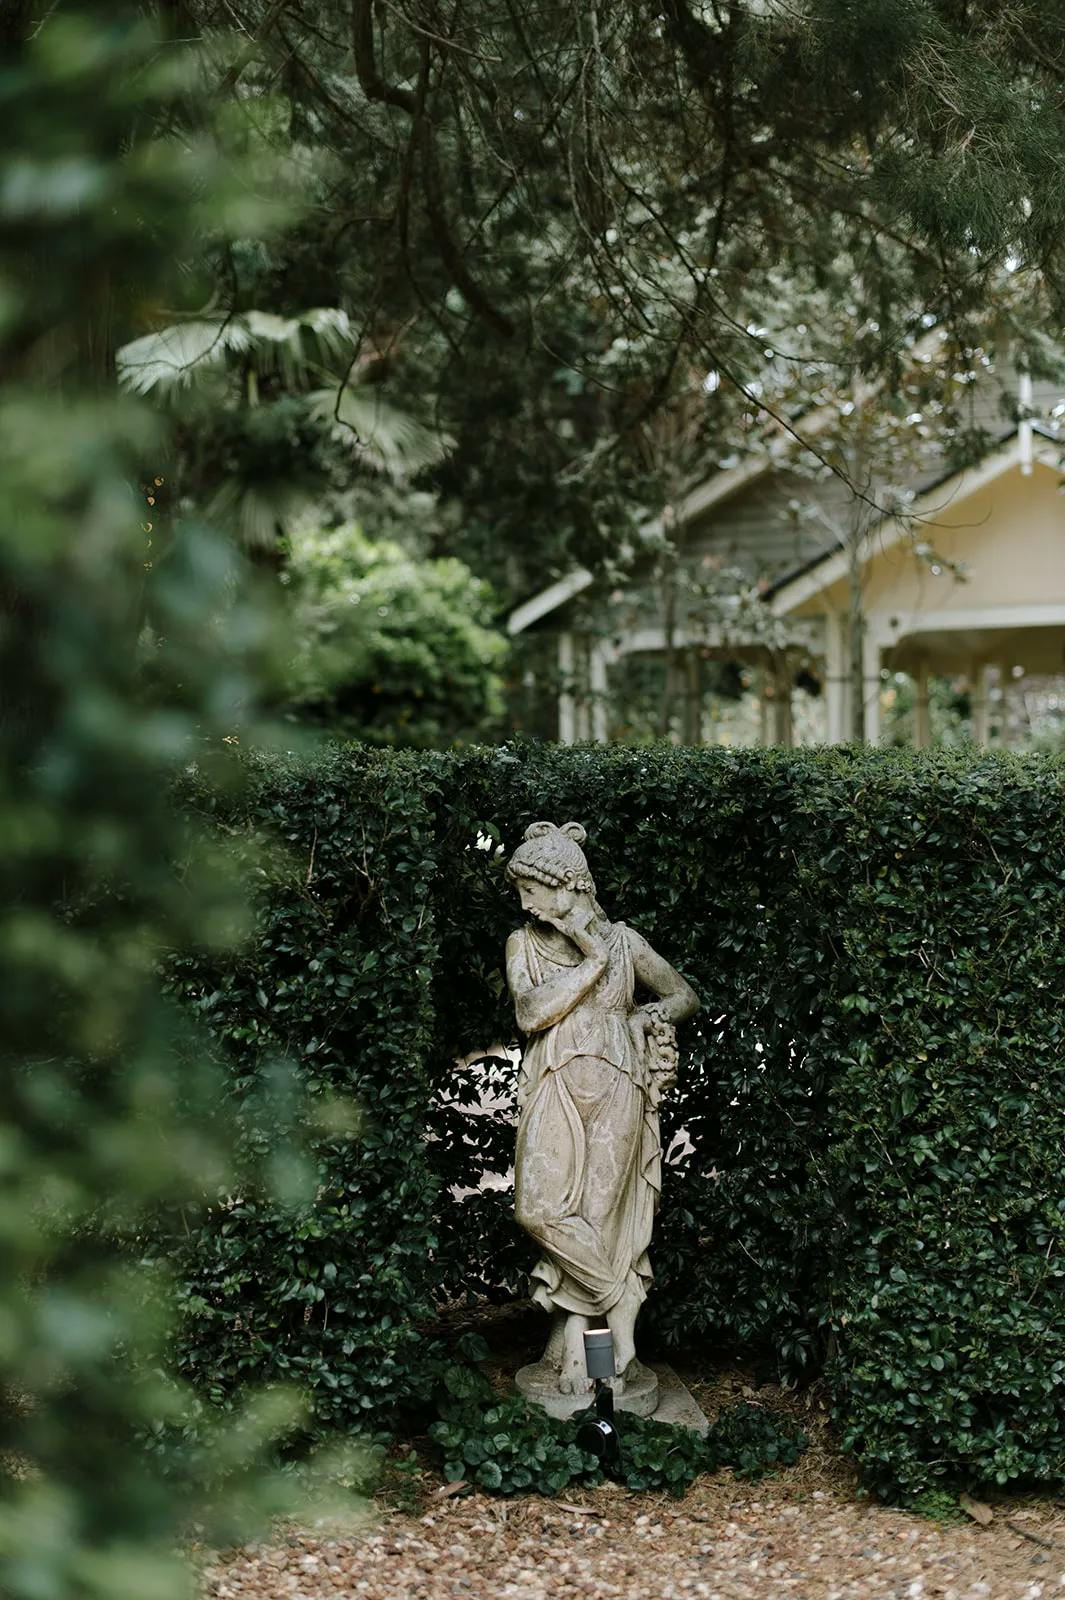 A stone statue of a woman in classical attire stands partially obscured by dense green bushes and surrounded by tall trees. In the background, a light-colored building with a porch is visible through the foliage, adding to the serene garden ambiance.